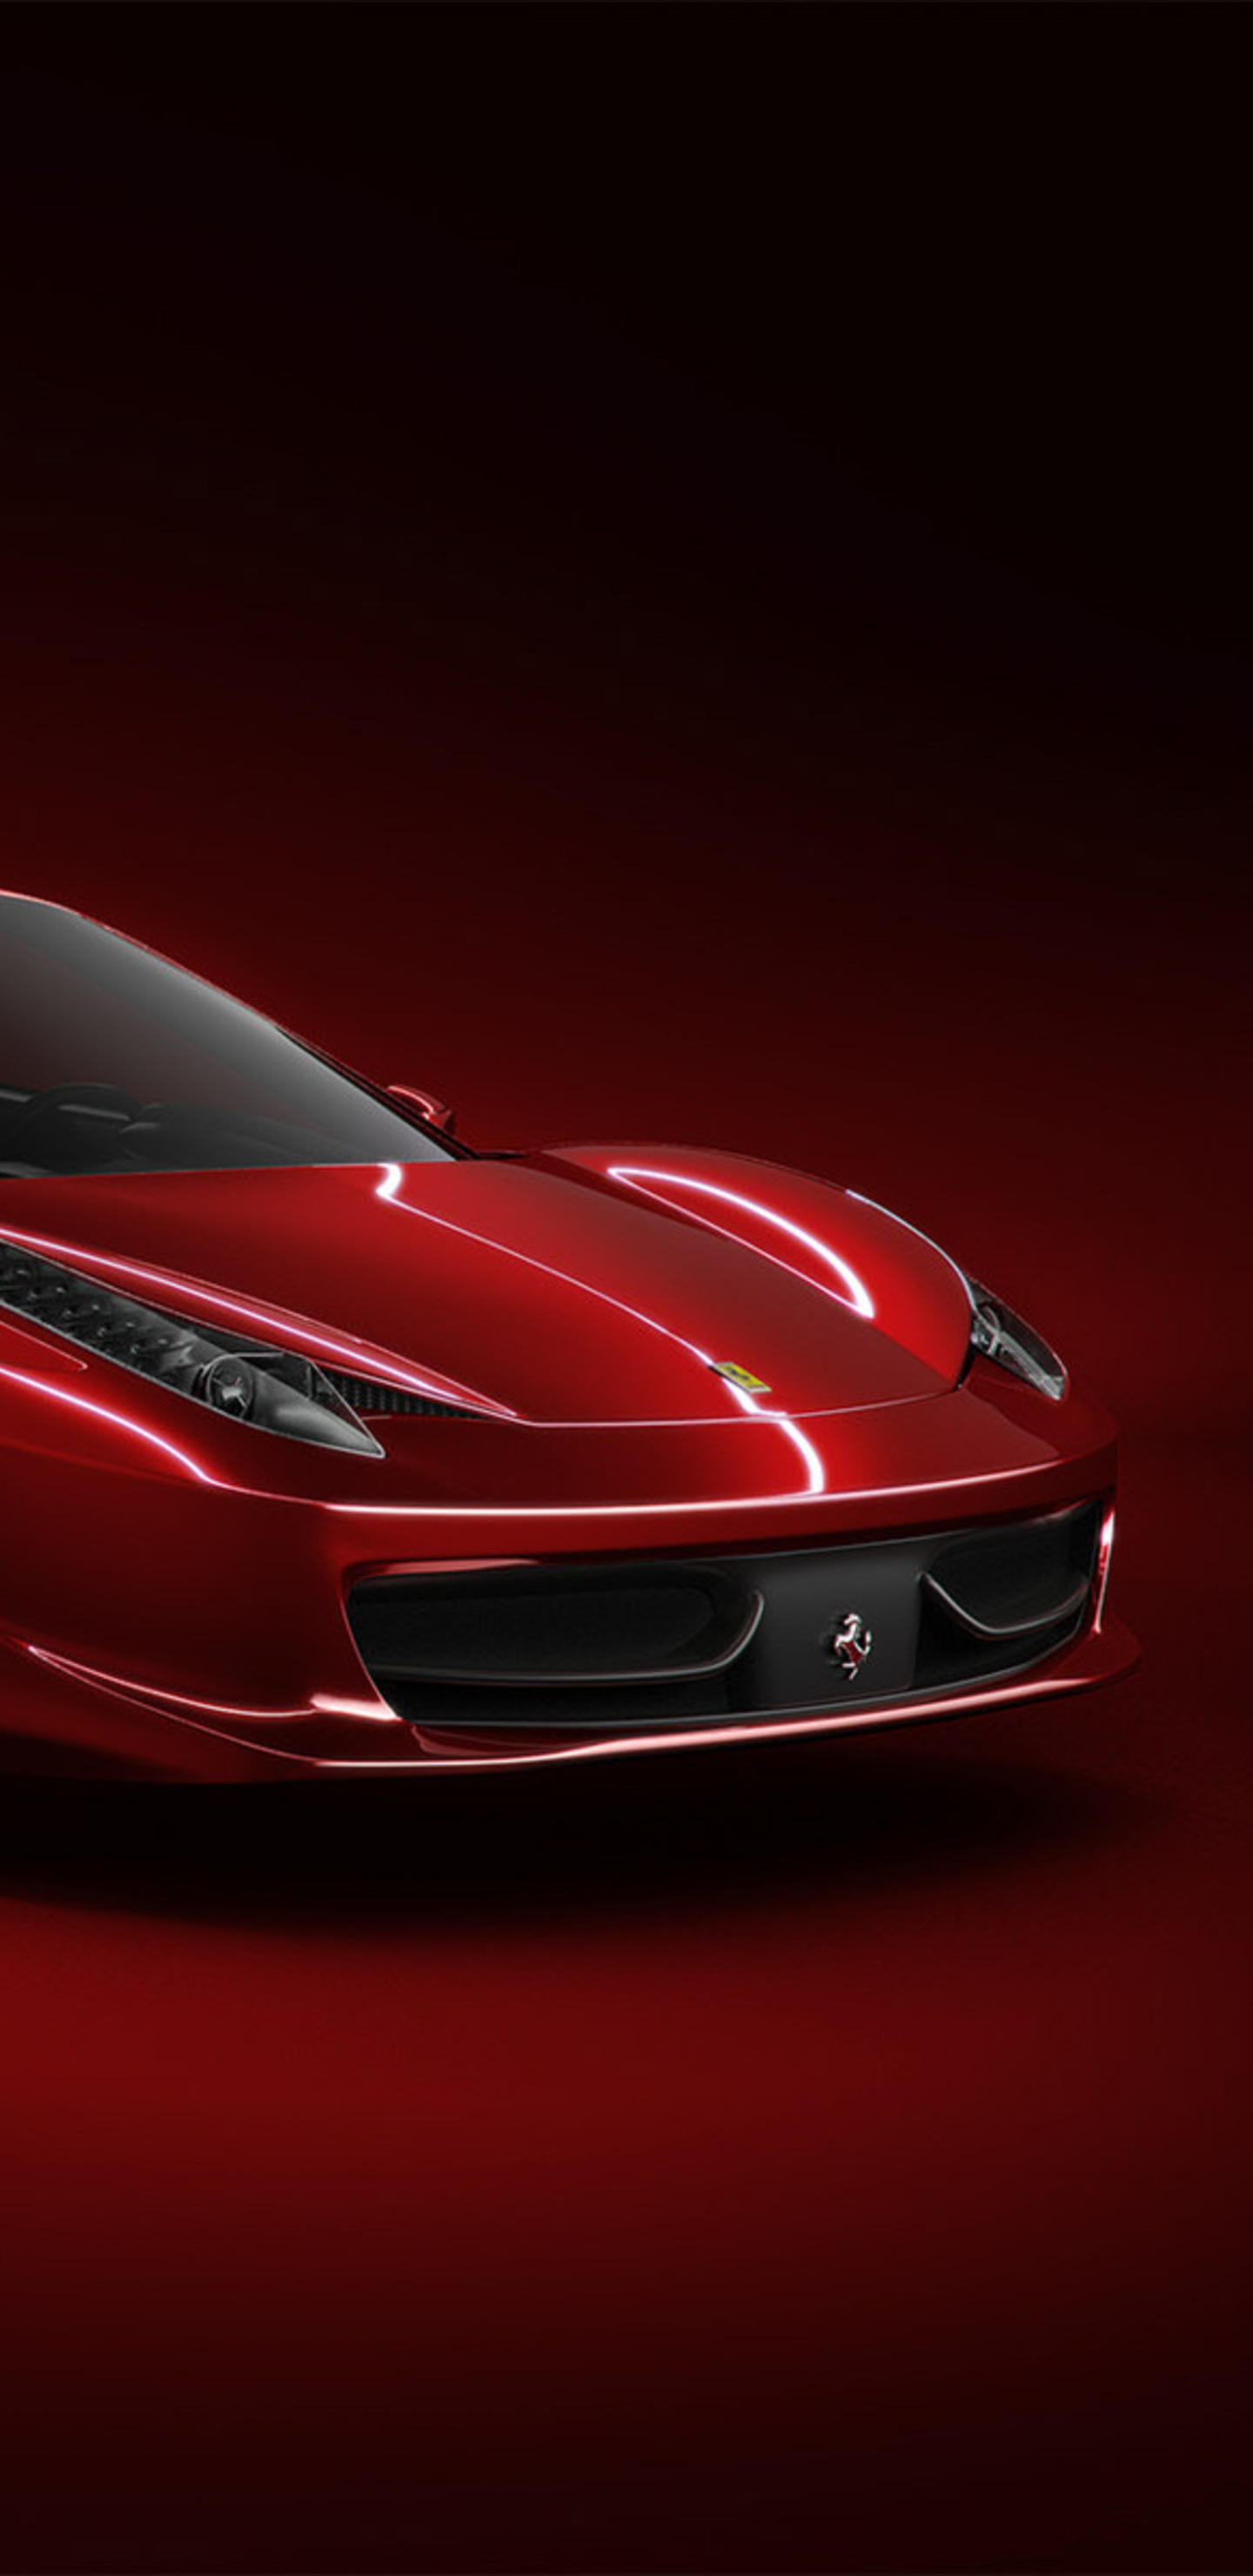 1440x2960 Red Ferrari New Samsung Galaxy Note 9 8 S9 S8 S8 Qhd Hd 4k Wallpapers Images Backgrounds Photos And Pictures